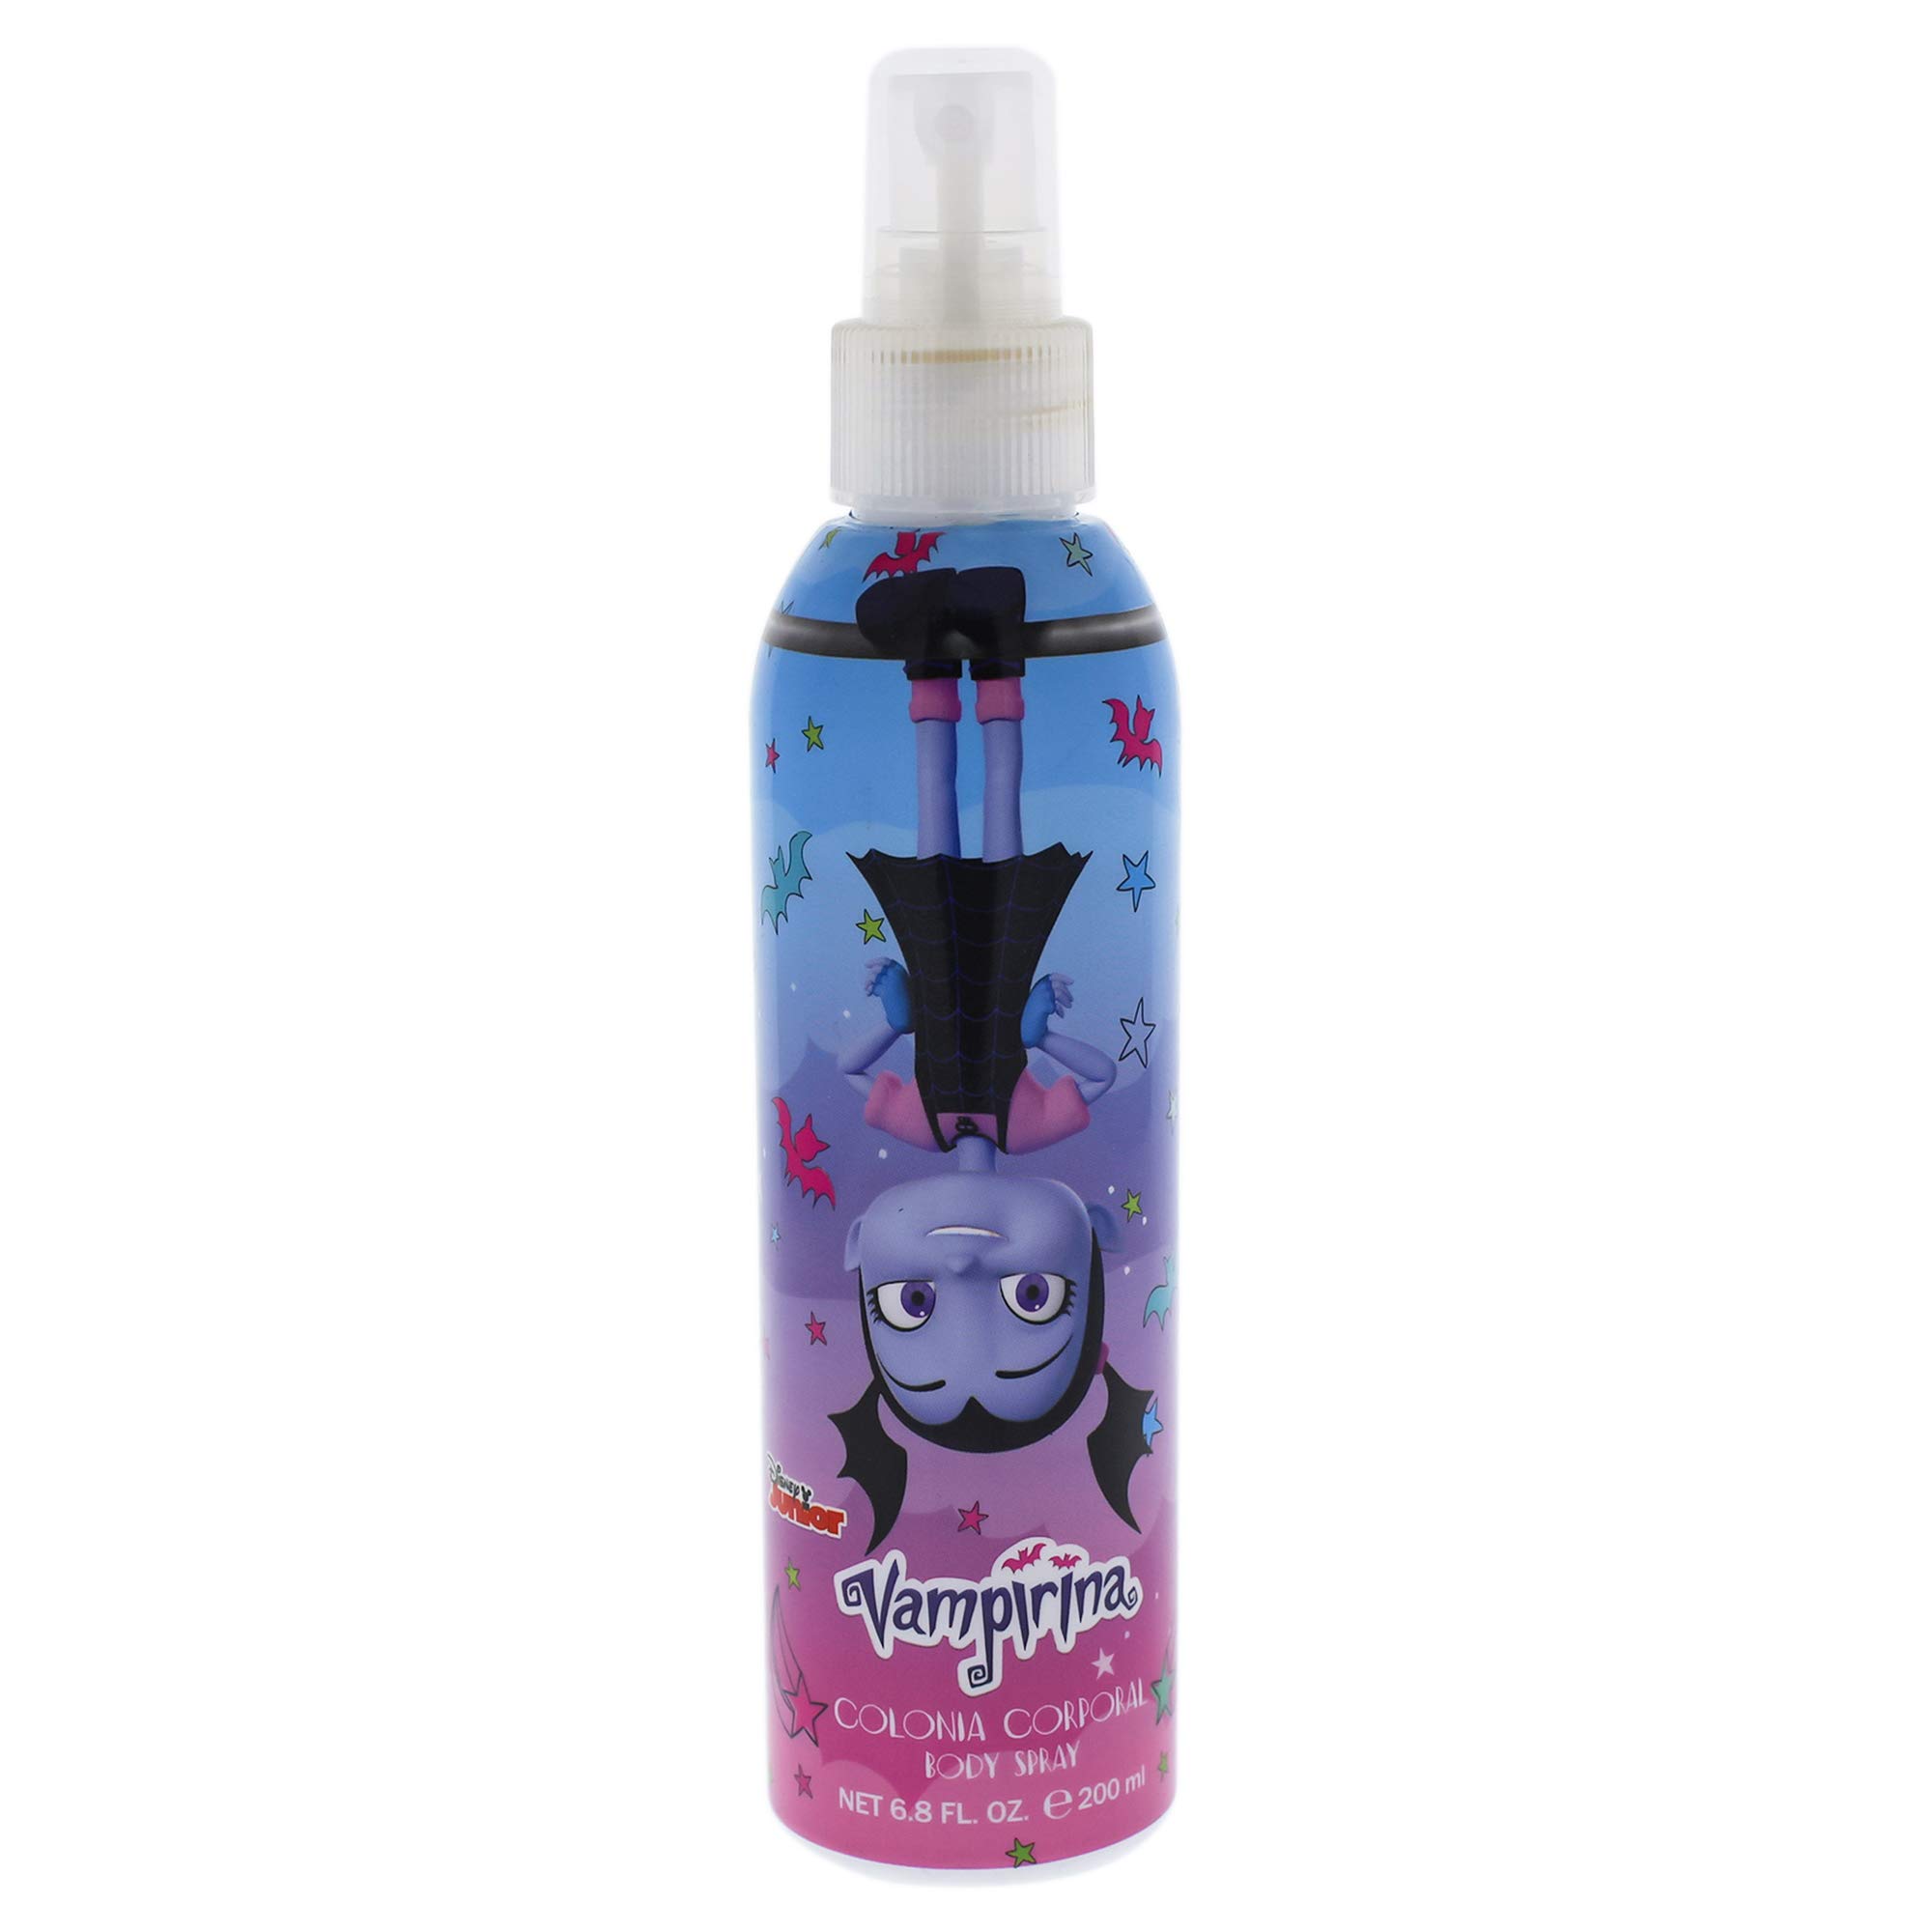 Disney Vampirina Cool Cologne/Body Spray for Kids Made in Spain By Air Val International, Purple, Black, Vamparina Body Spray, 6.8 Oz, Purple, Black (Pack of 2)